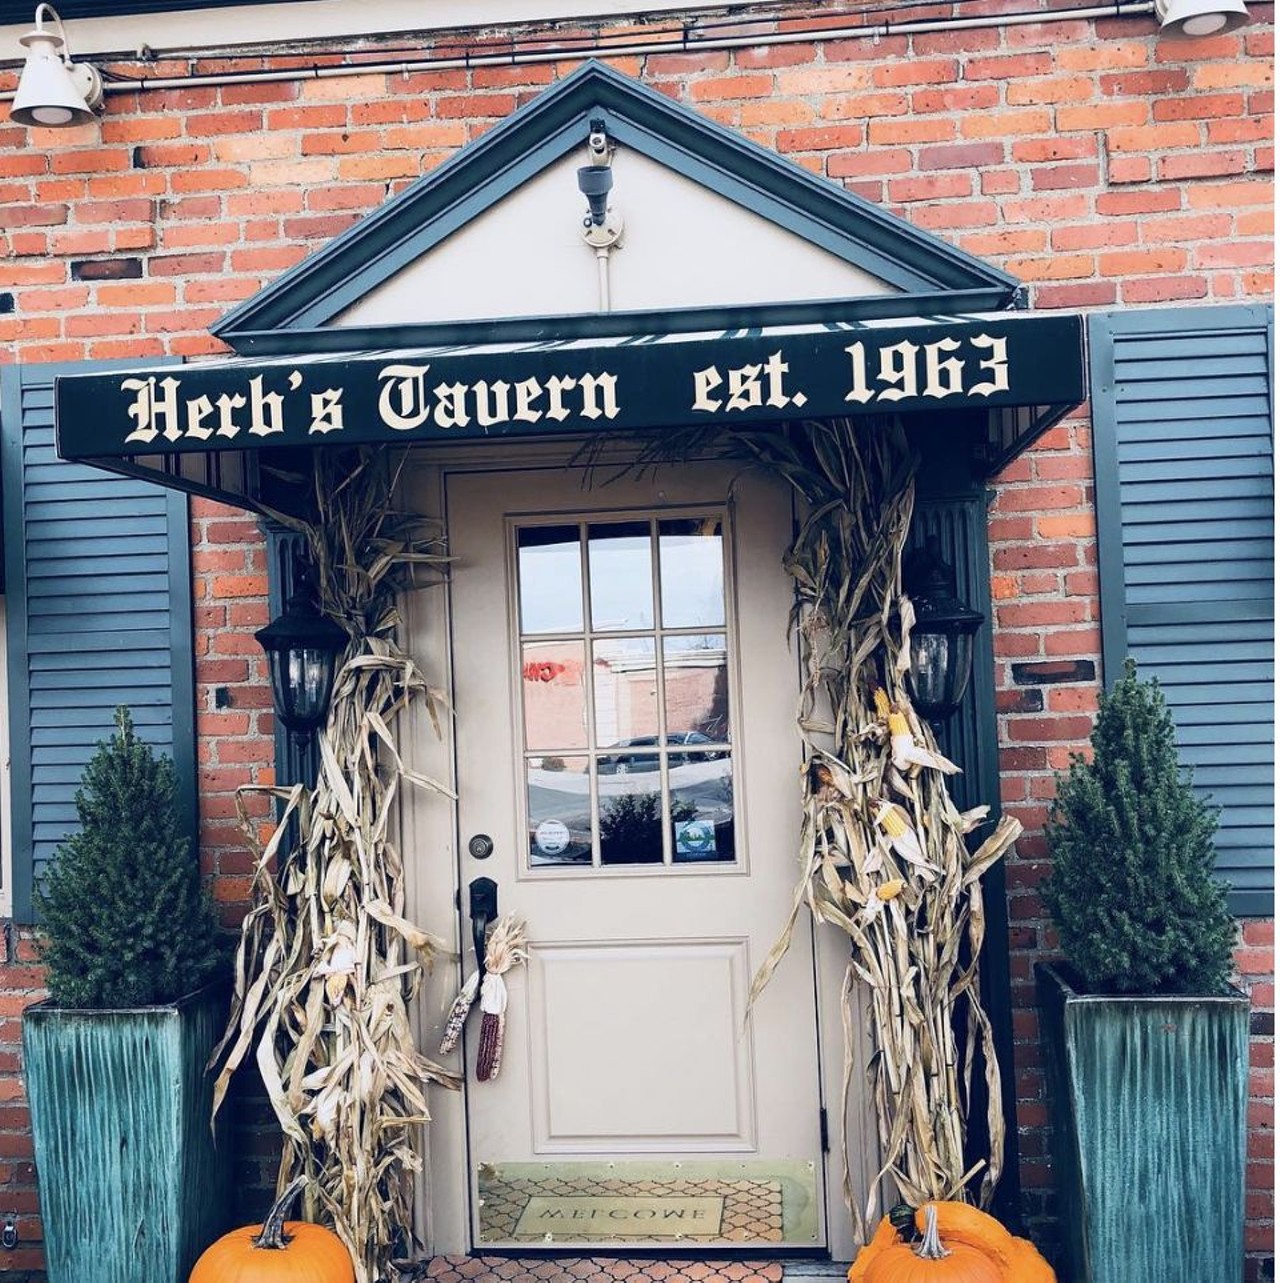  Herb&#146;s Tavern
19925 Detroit Ave., Rocky River
Run out of a building from the 1930s, Herb's is a rustic Rocky River gem dishing out what Scene has previously deemed &#147;The Best Burger in Town.&#148;
Photo via @Herbs_Tavern/Instagram